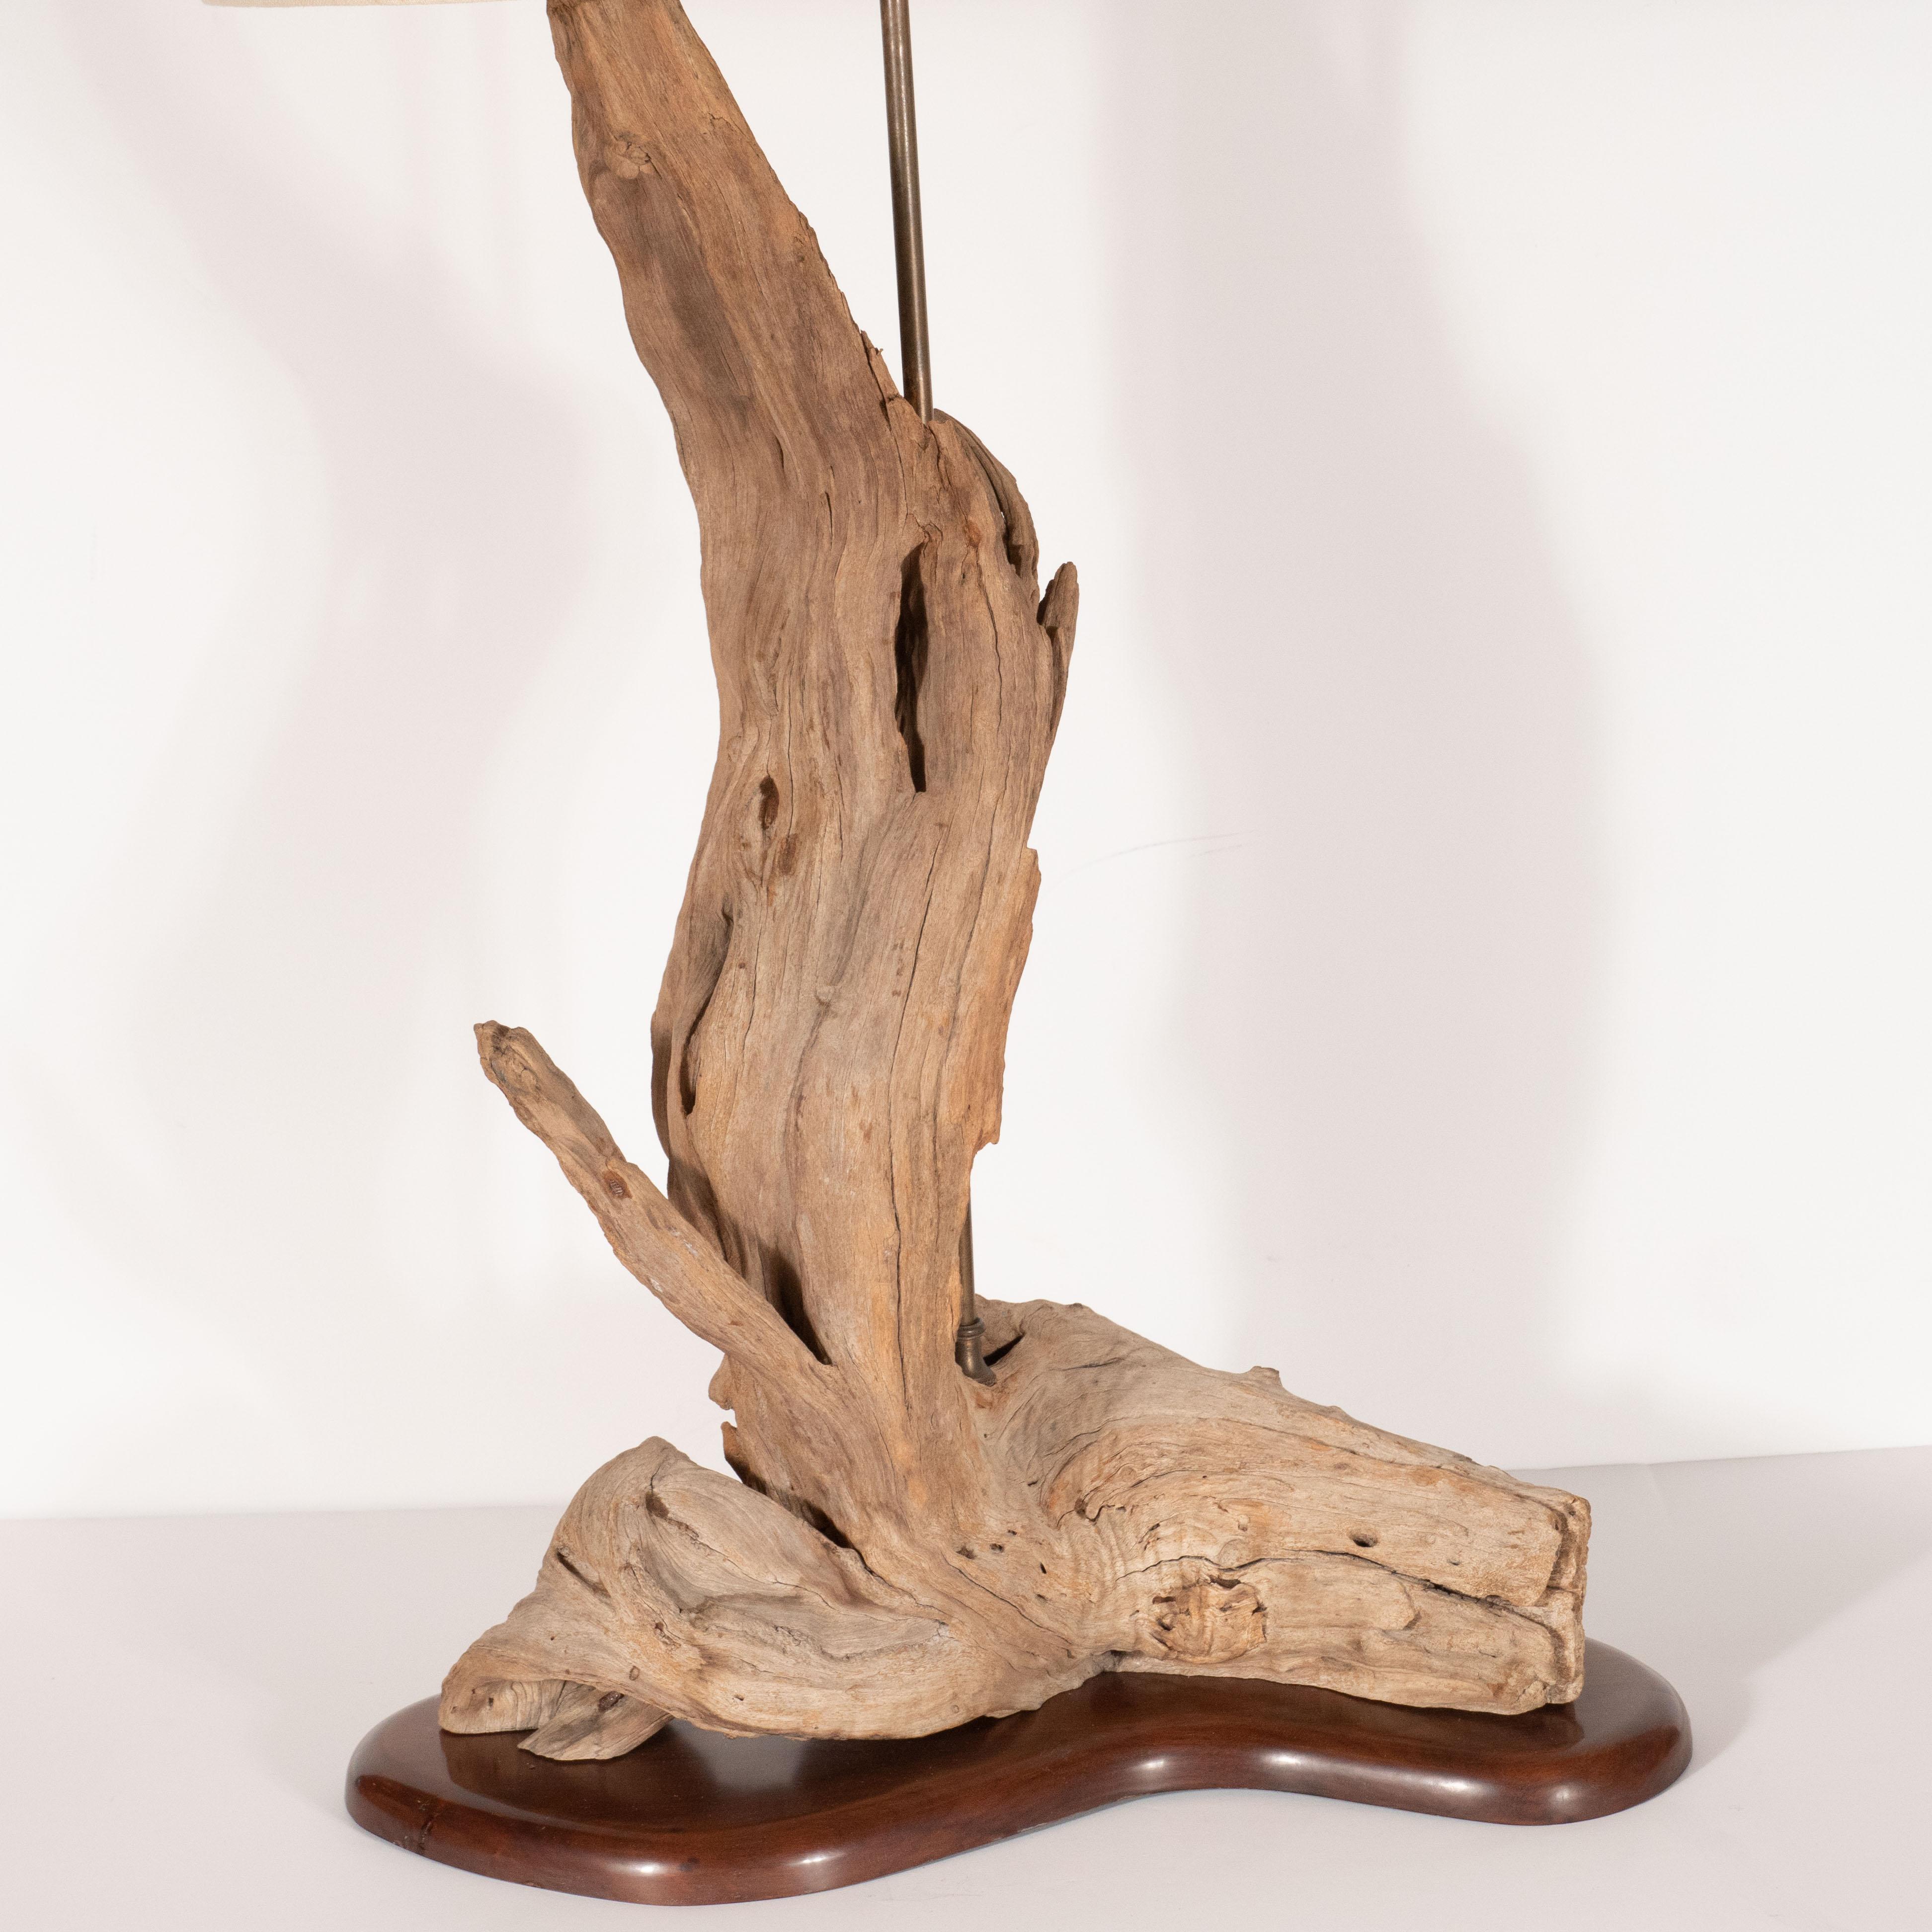 This graphic and casually elegant table lamp was realized in the United States, circa 1950. If features a sculptural body composed of unfinished driftwood resting on a amorphic stylized 